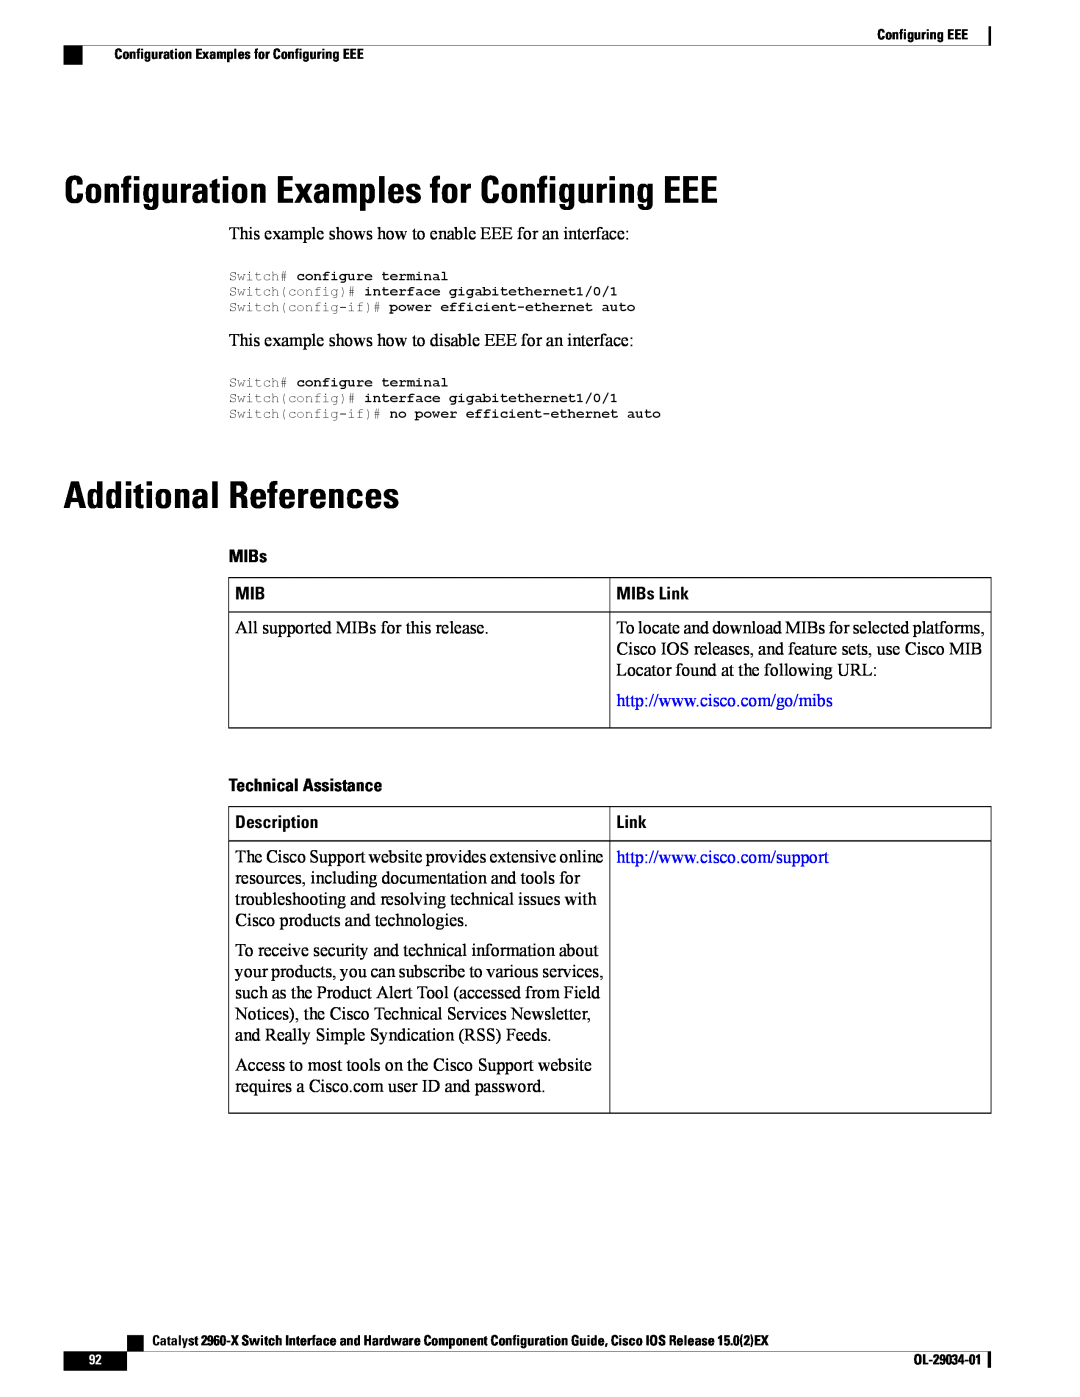 Cisco Systems WSC2960X48TDL Configuration Examples for Configuring EEE, Additional References, Technical Assistance, Link 